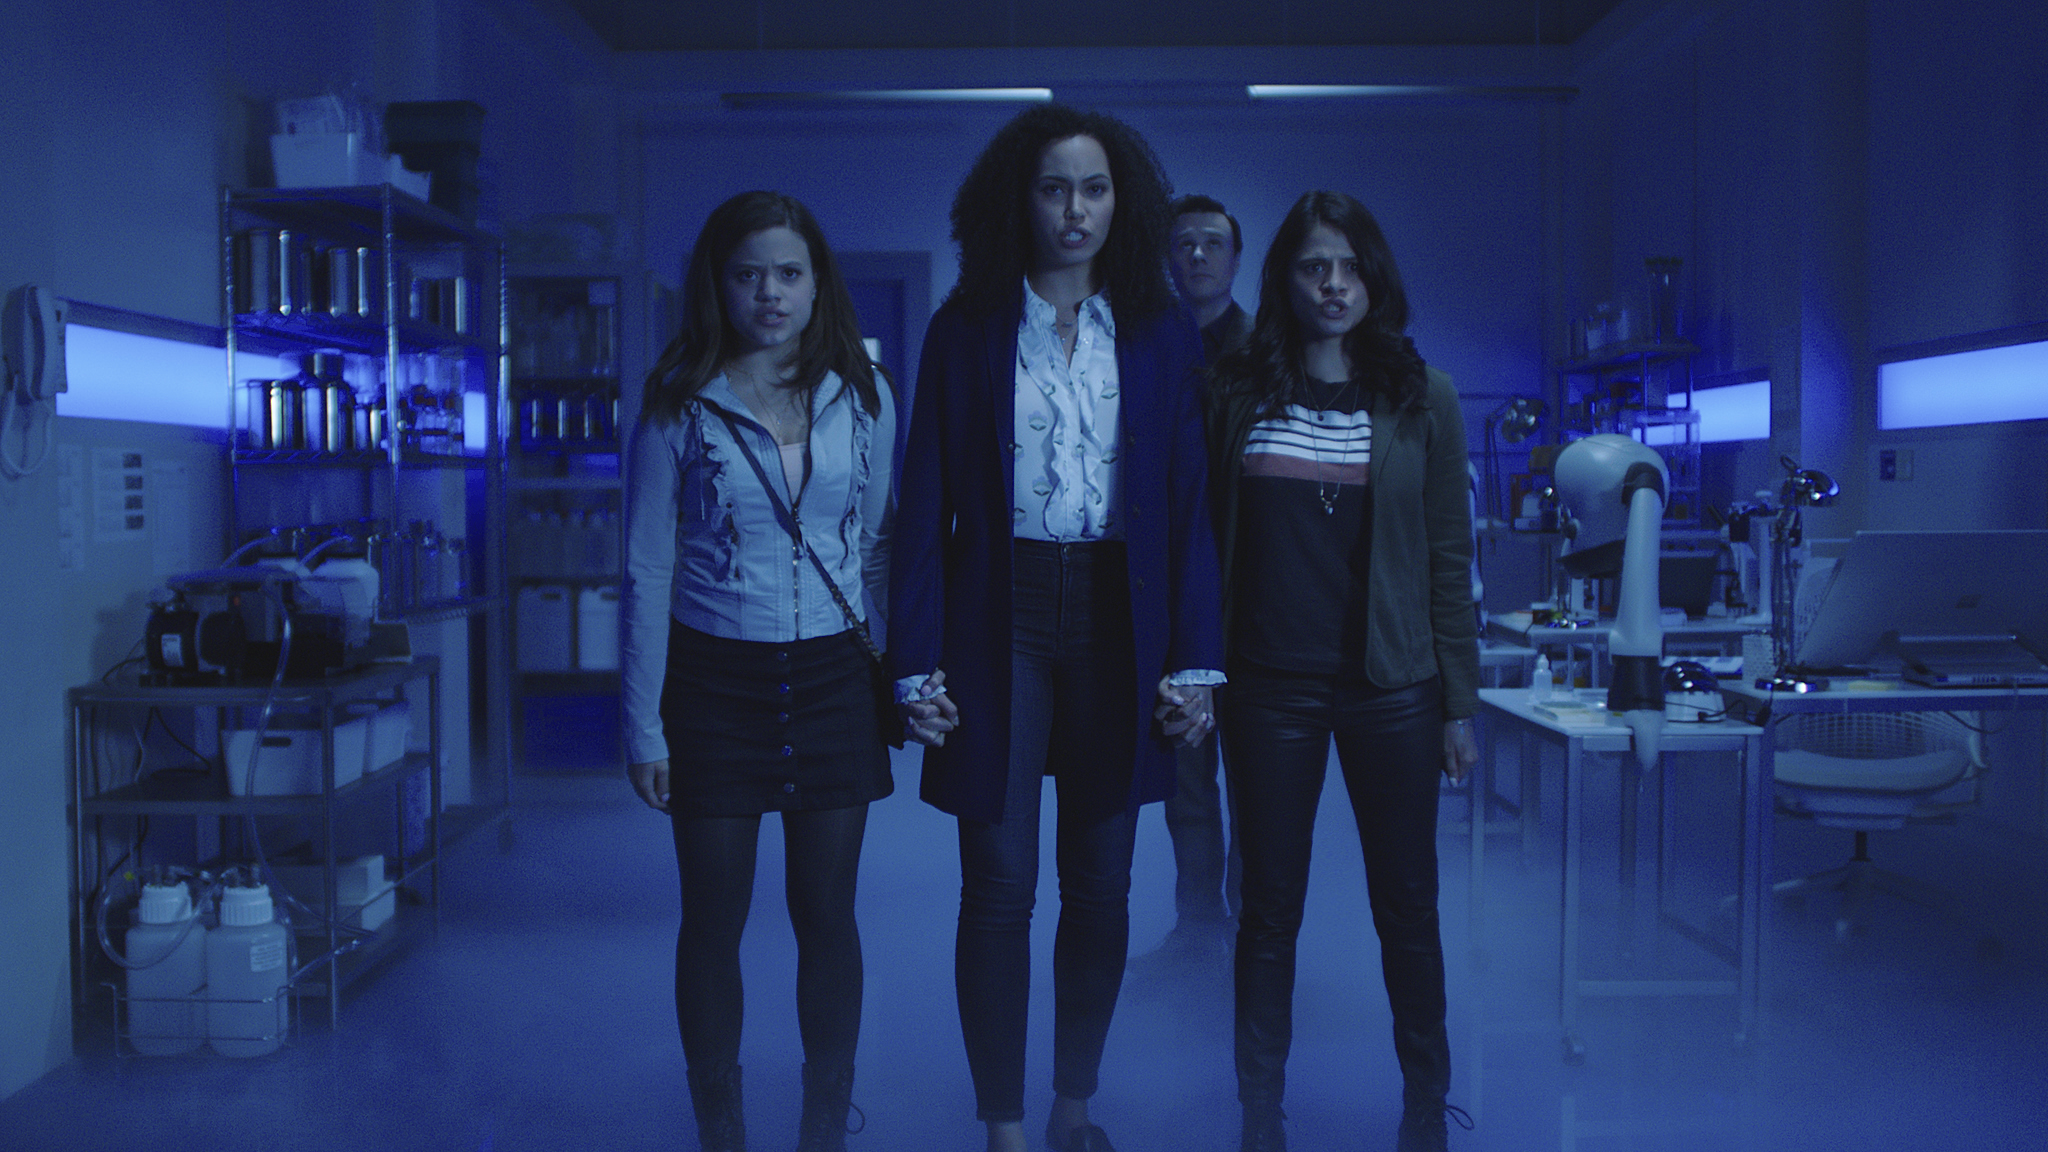 Screen grab from the pilot episode of Charmed. Pictured (L-R): Sarah Jeffery as Maggie Vera, Madeleine Mantock as Macy Vaughn, Rupert Evans as Harry Greenwood and Melonie Diaz as Mel Vera